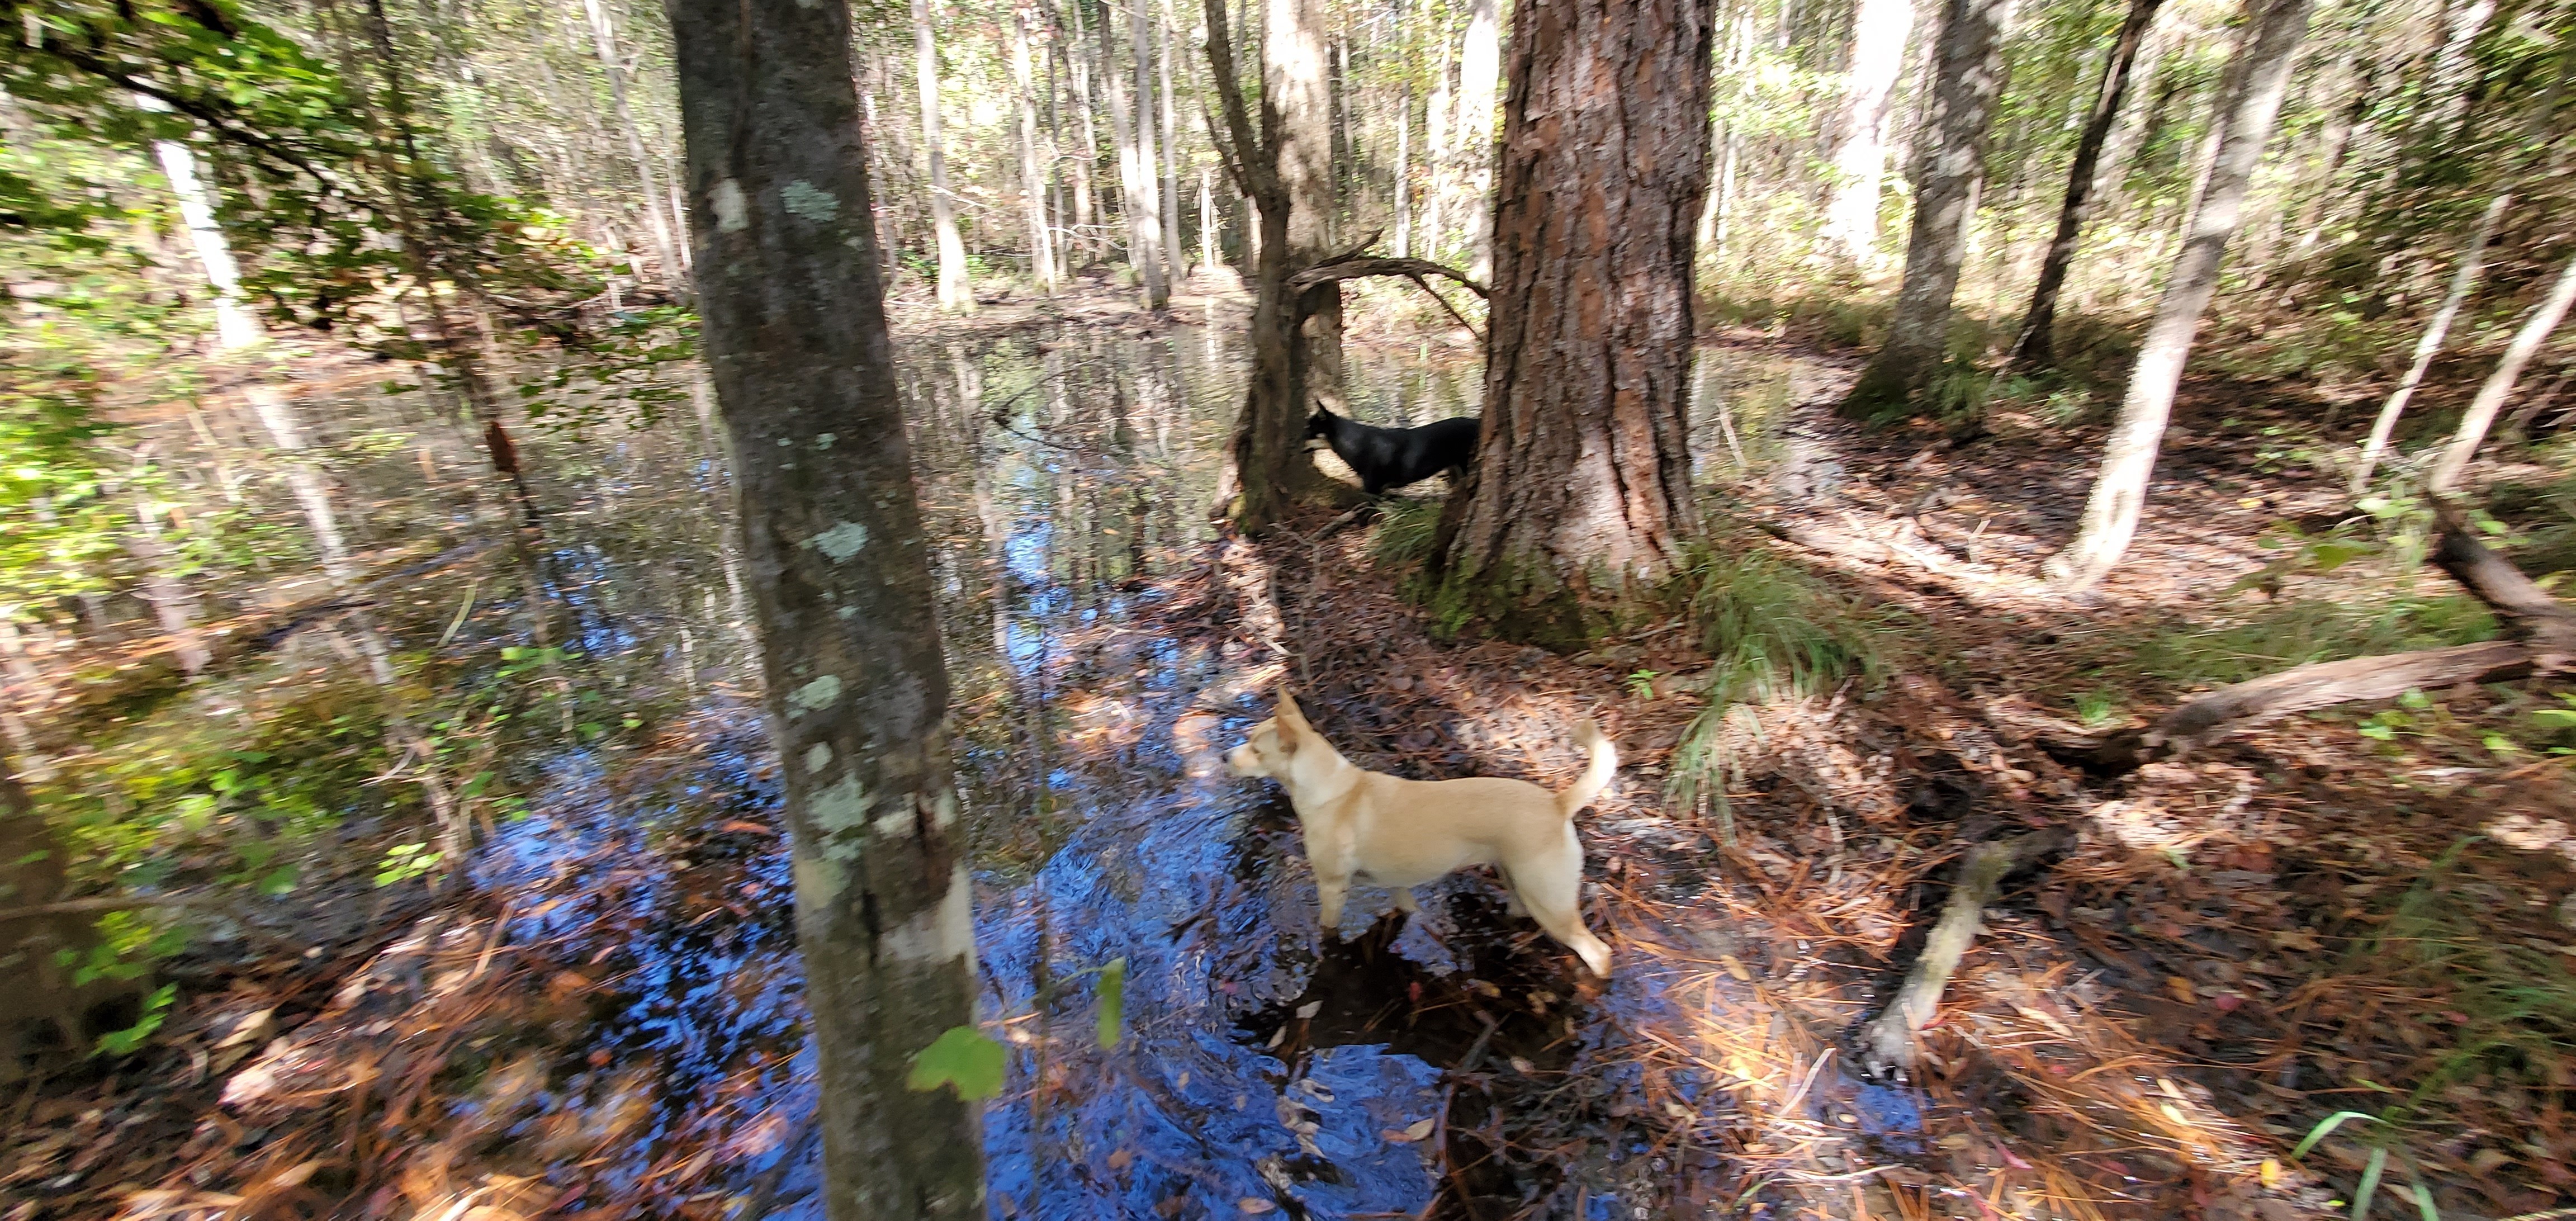 Blondie and Arrow pointing in the Cypress Swamp.